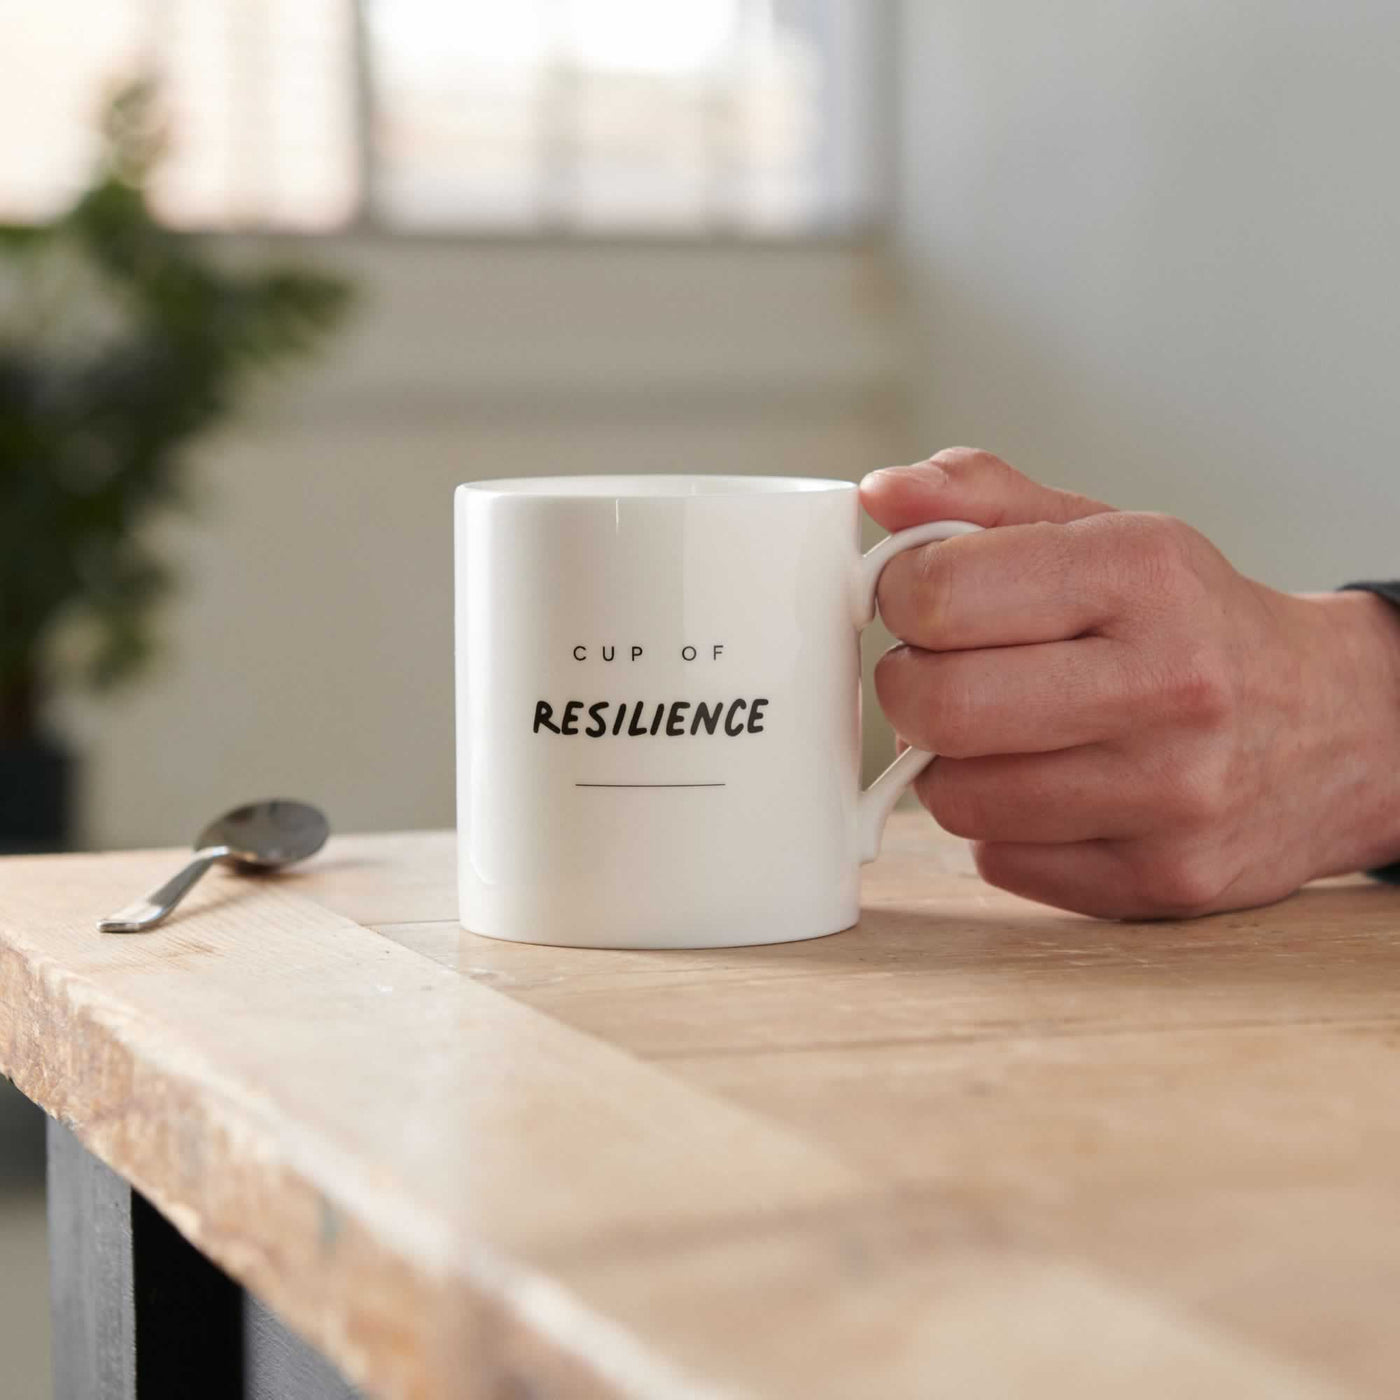 Cup of Resilience Mug on Table with hand